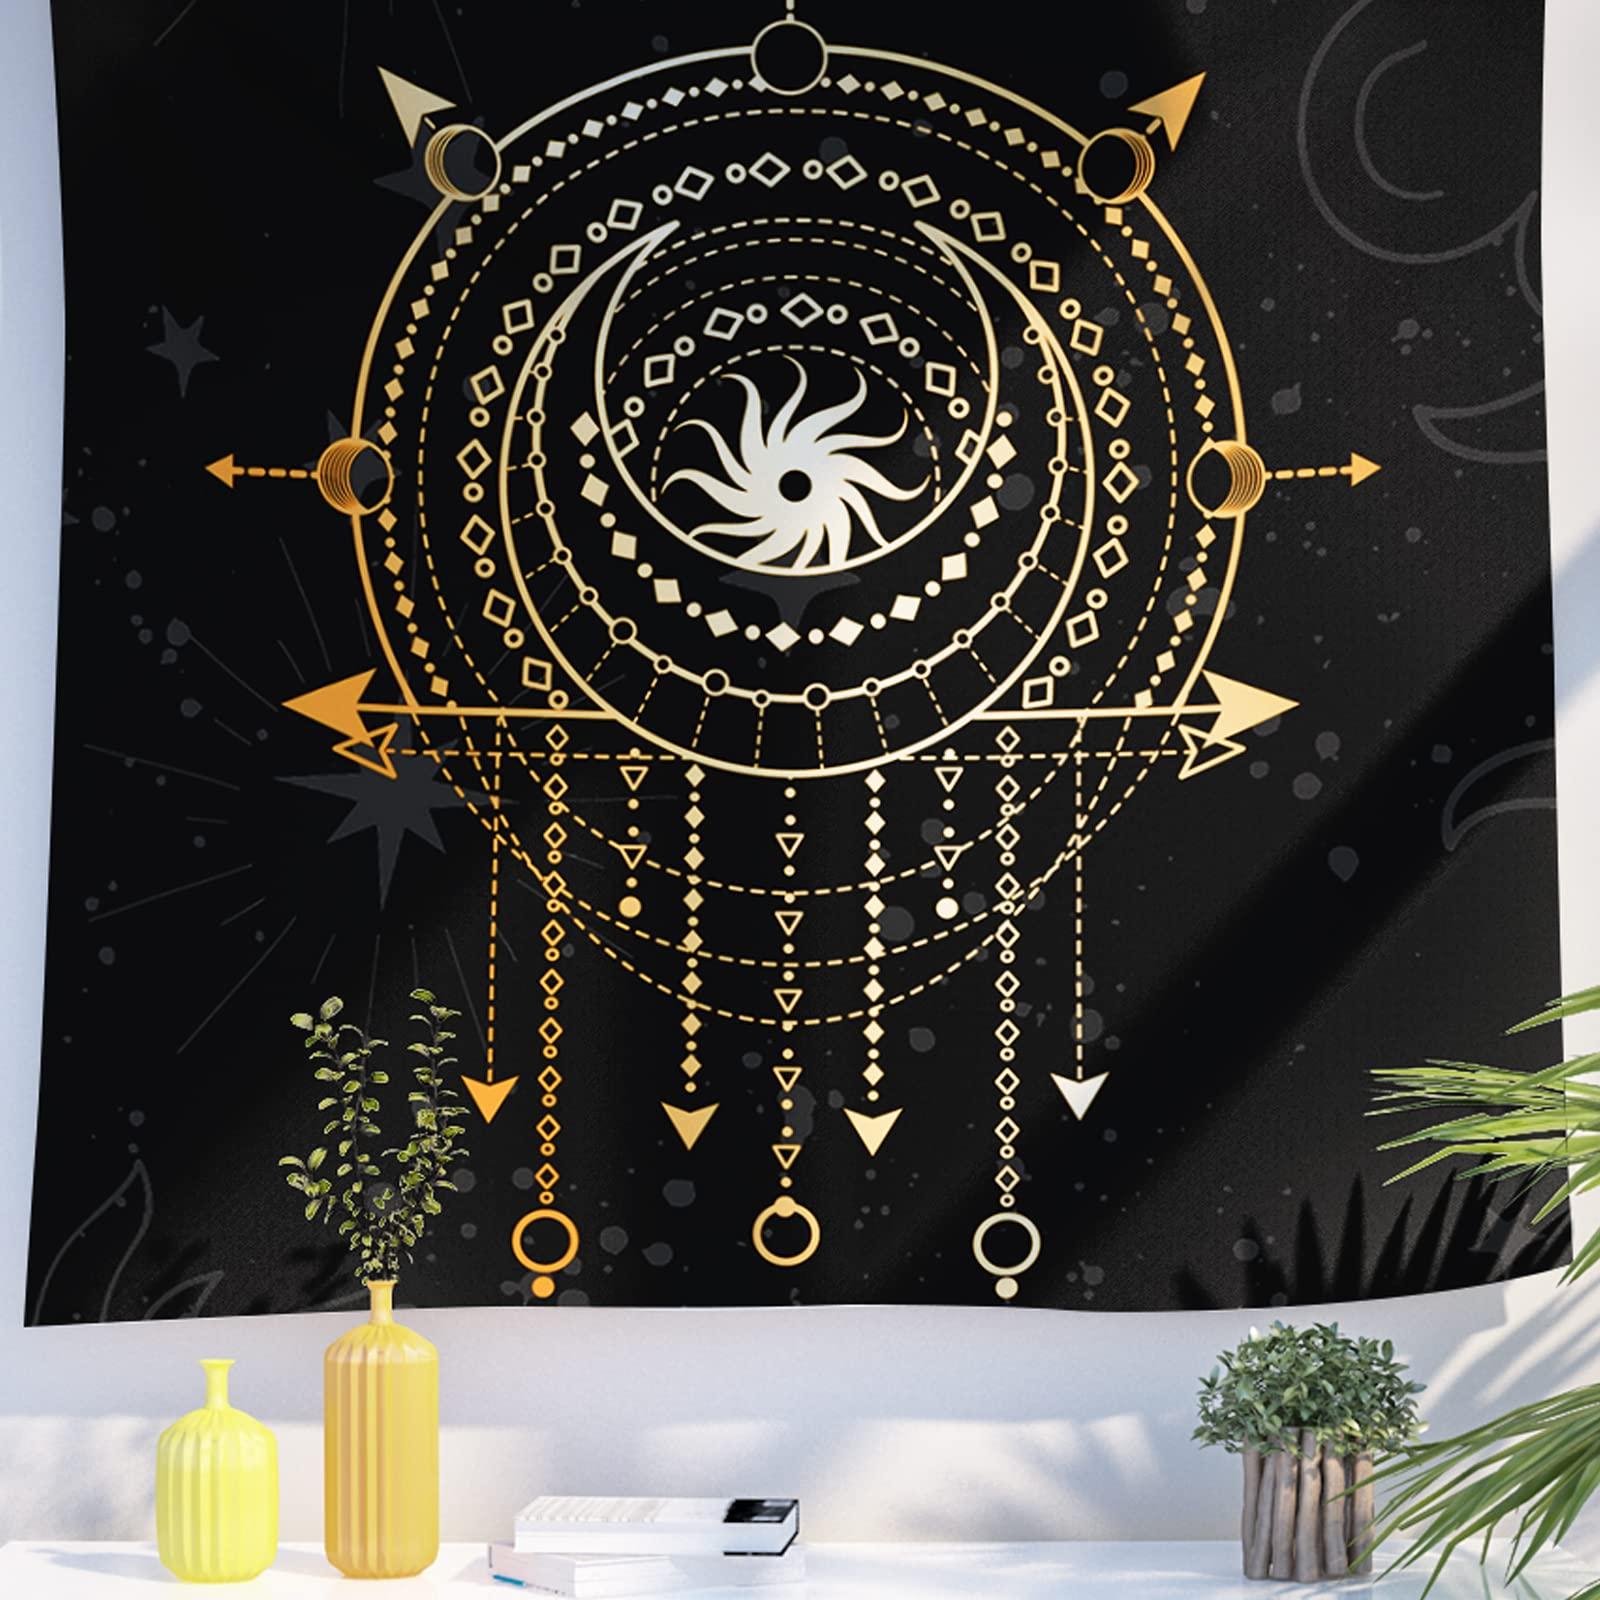 Berkin Arts Decor Tapestry for Wall Hanging Premium Polyester Fabric Backdrop Space Art Ornate Galactic Gold Psychedelic Dark Geometric 51.2 x 59.1 Inch